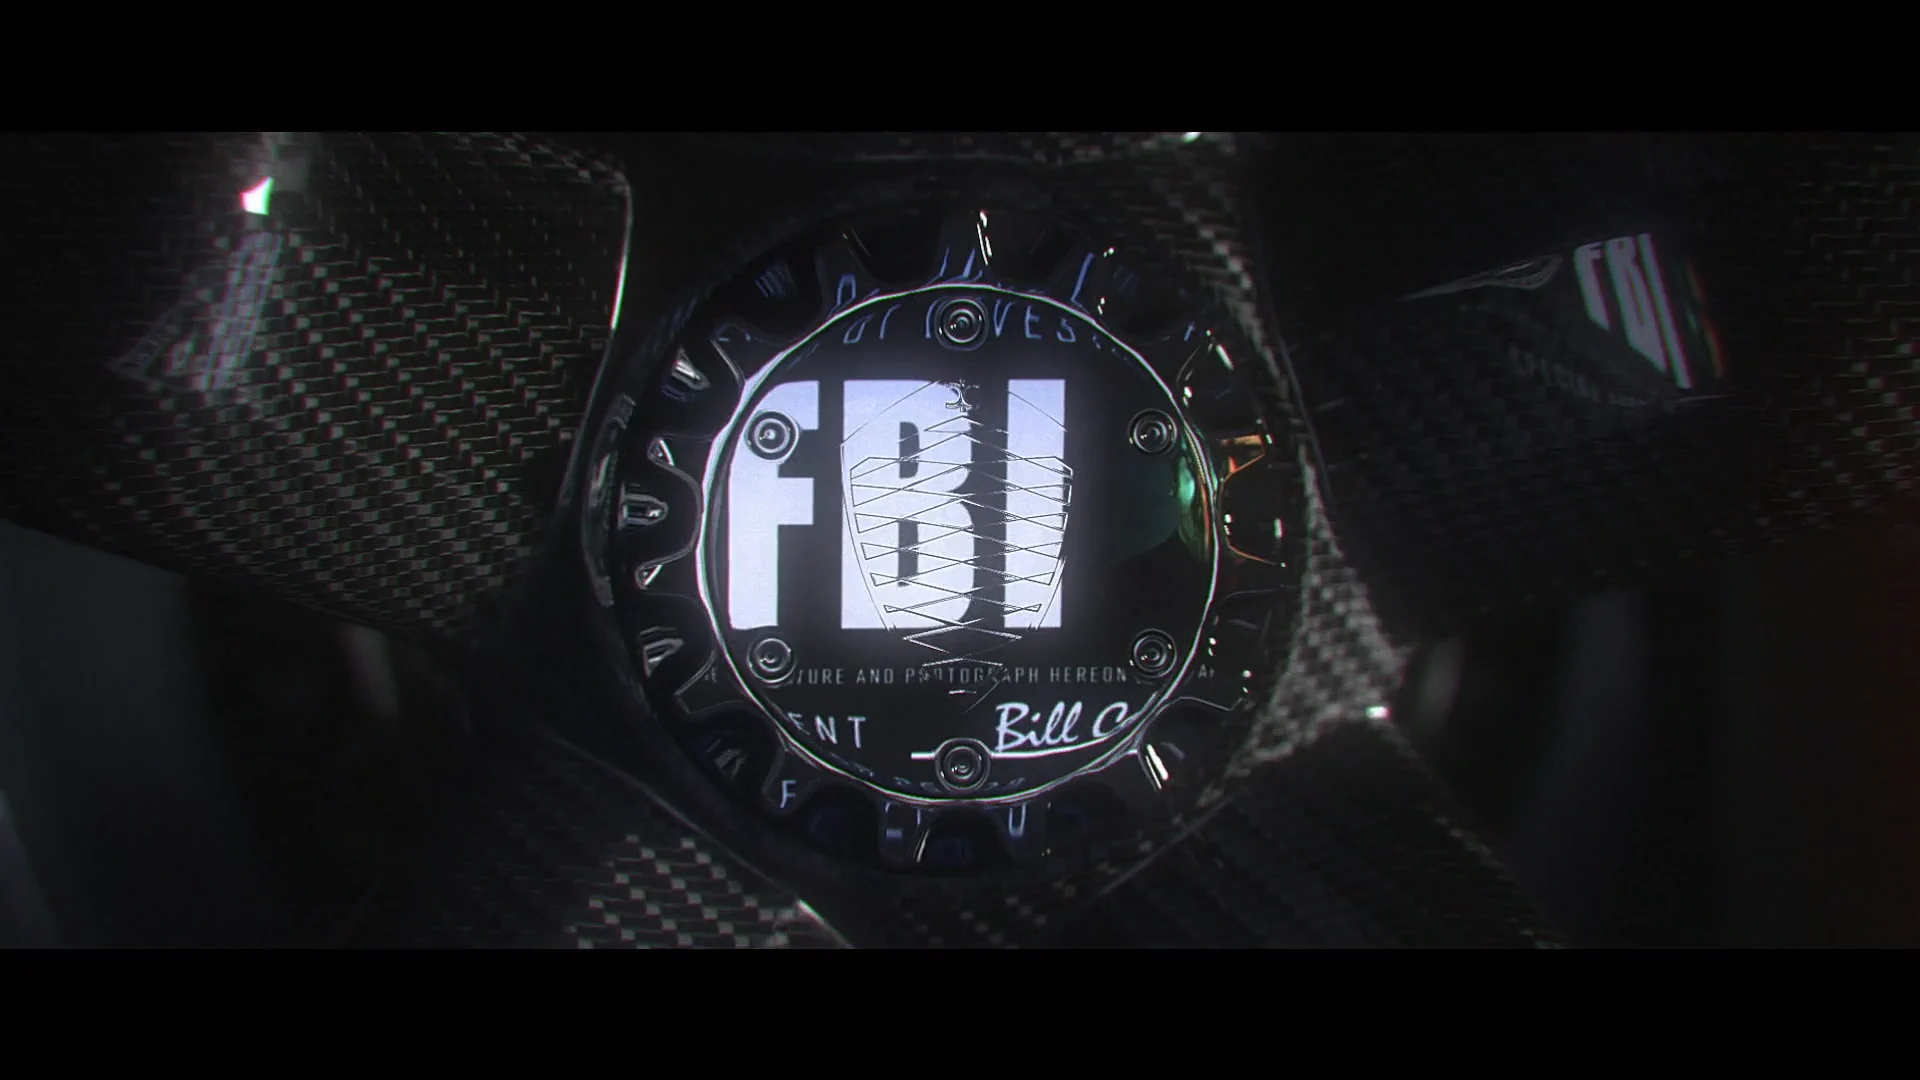 The letters FBI as a reflection or projection on a black surface